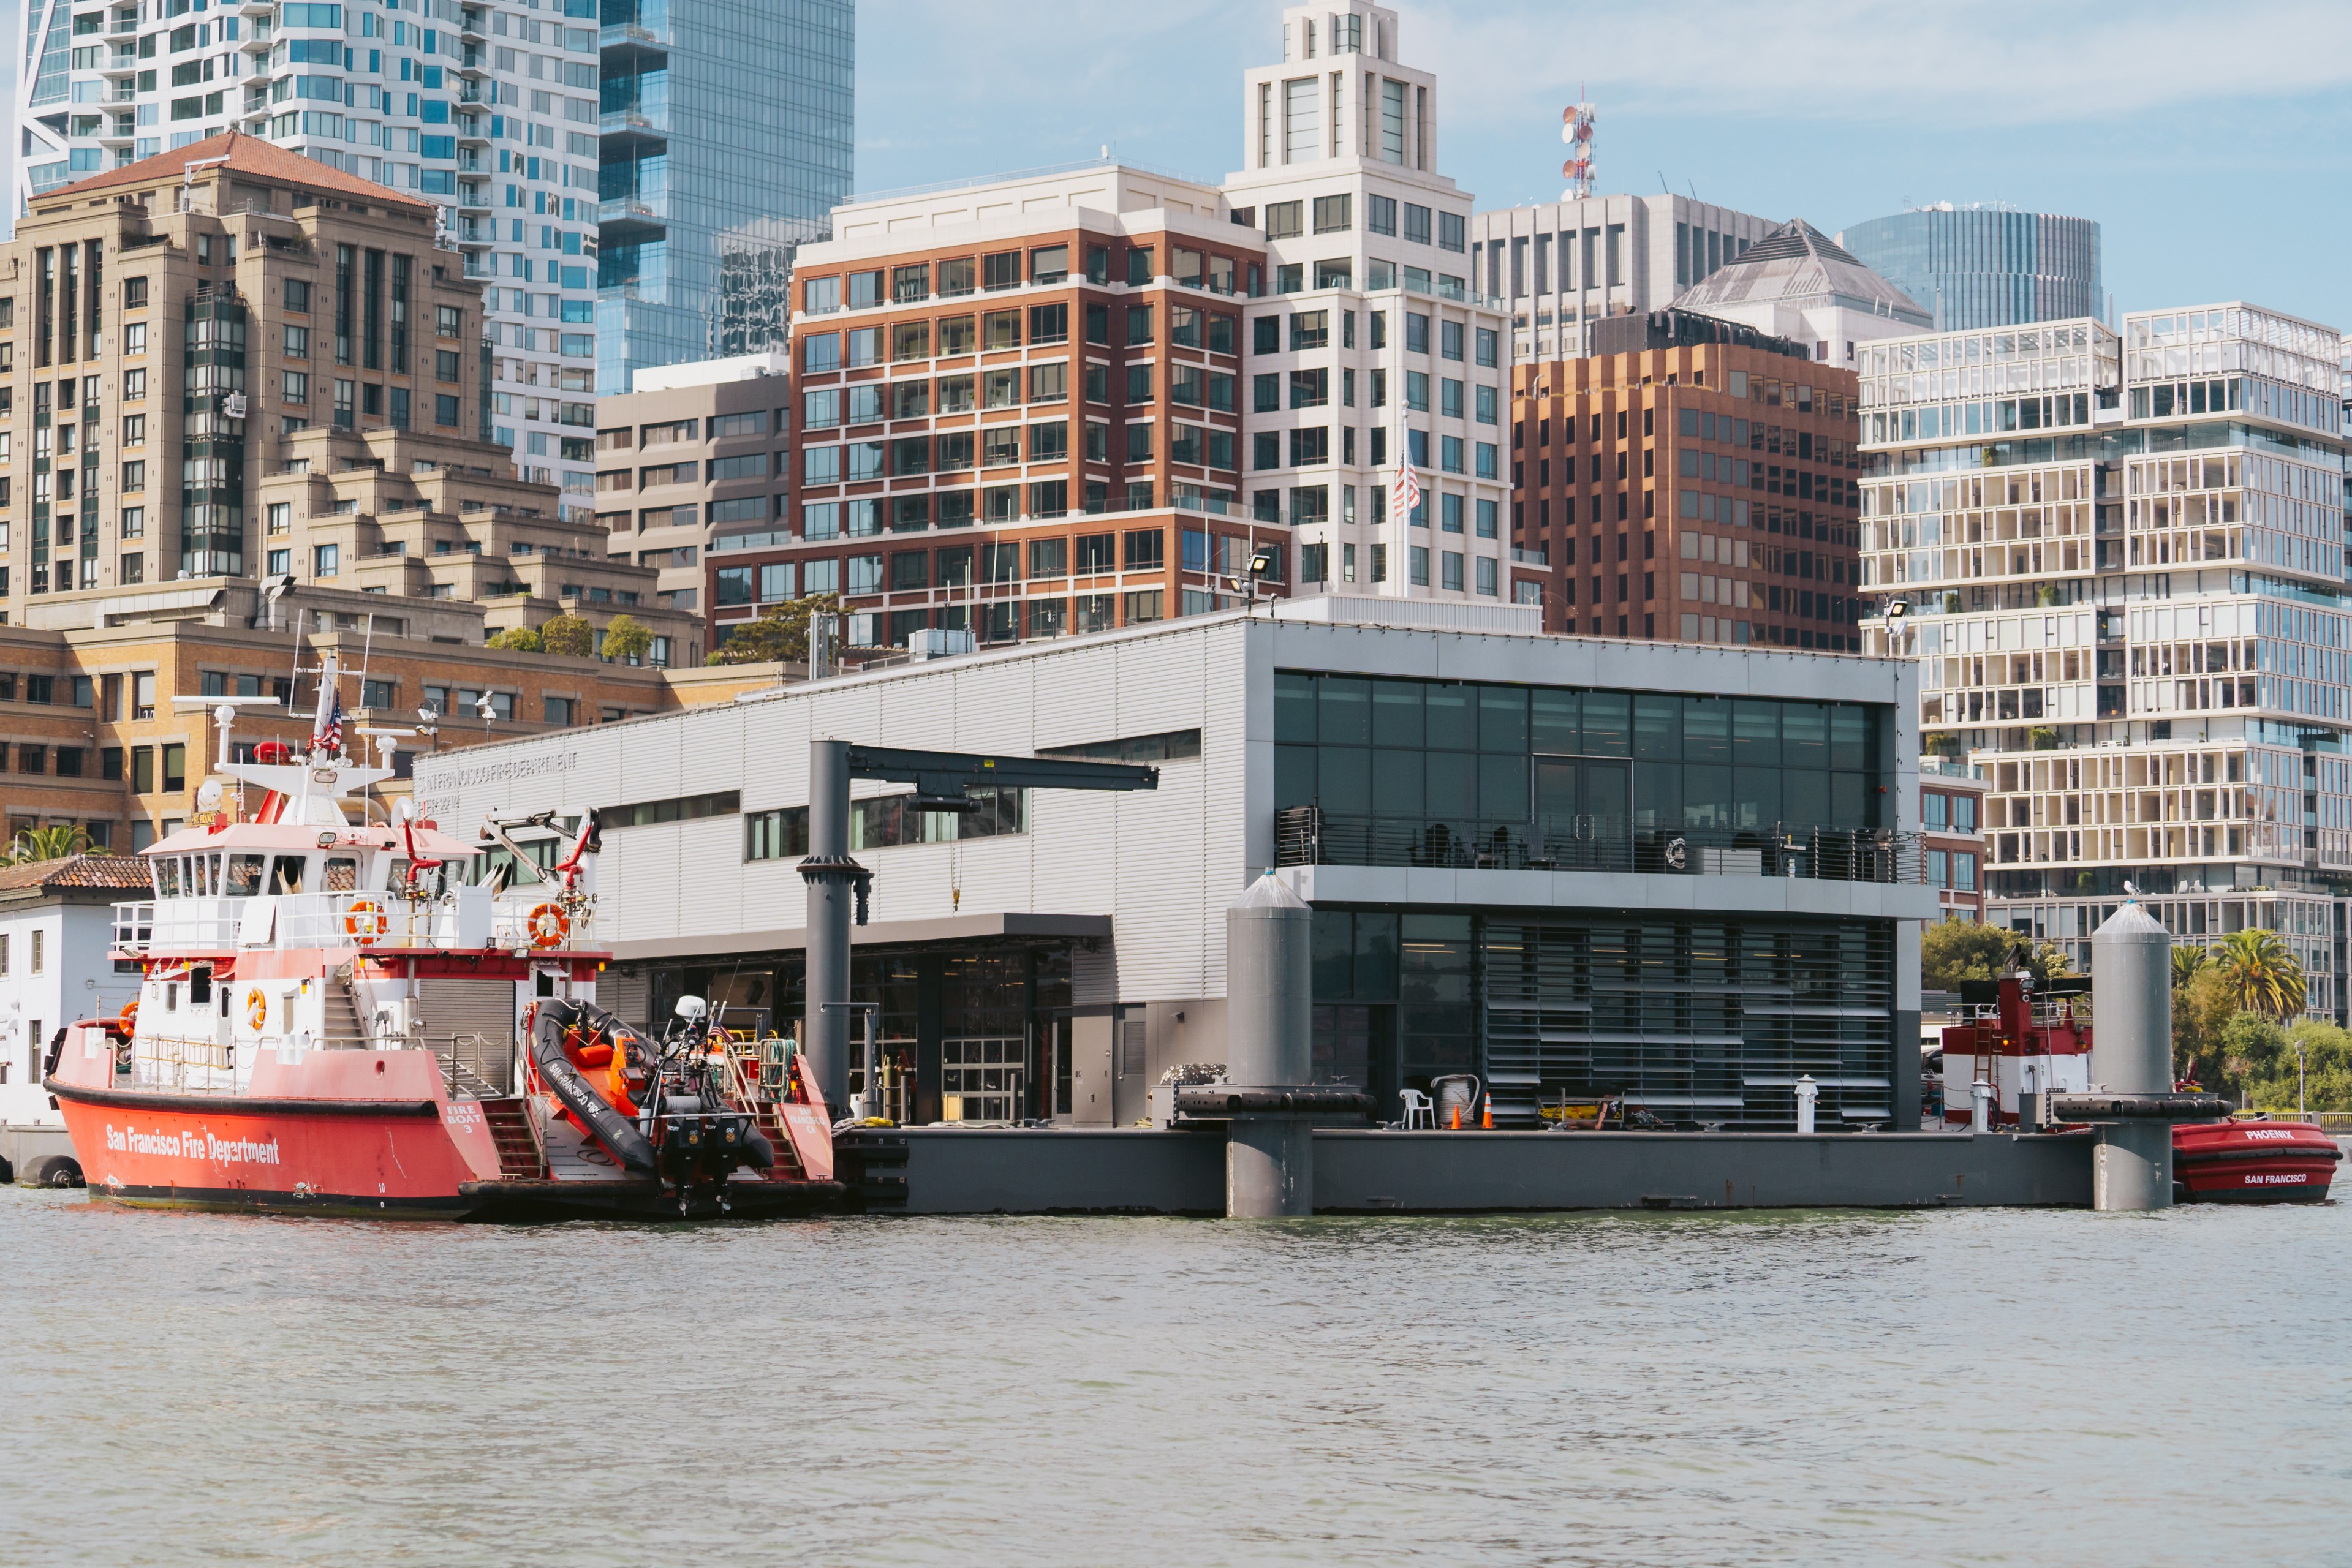 A red and white fire department boat is docked near a modern, multi-story building along a waterfront, with various taller buildings in the background.